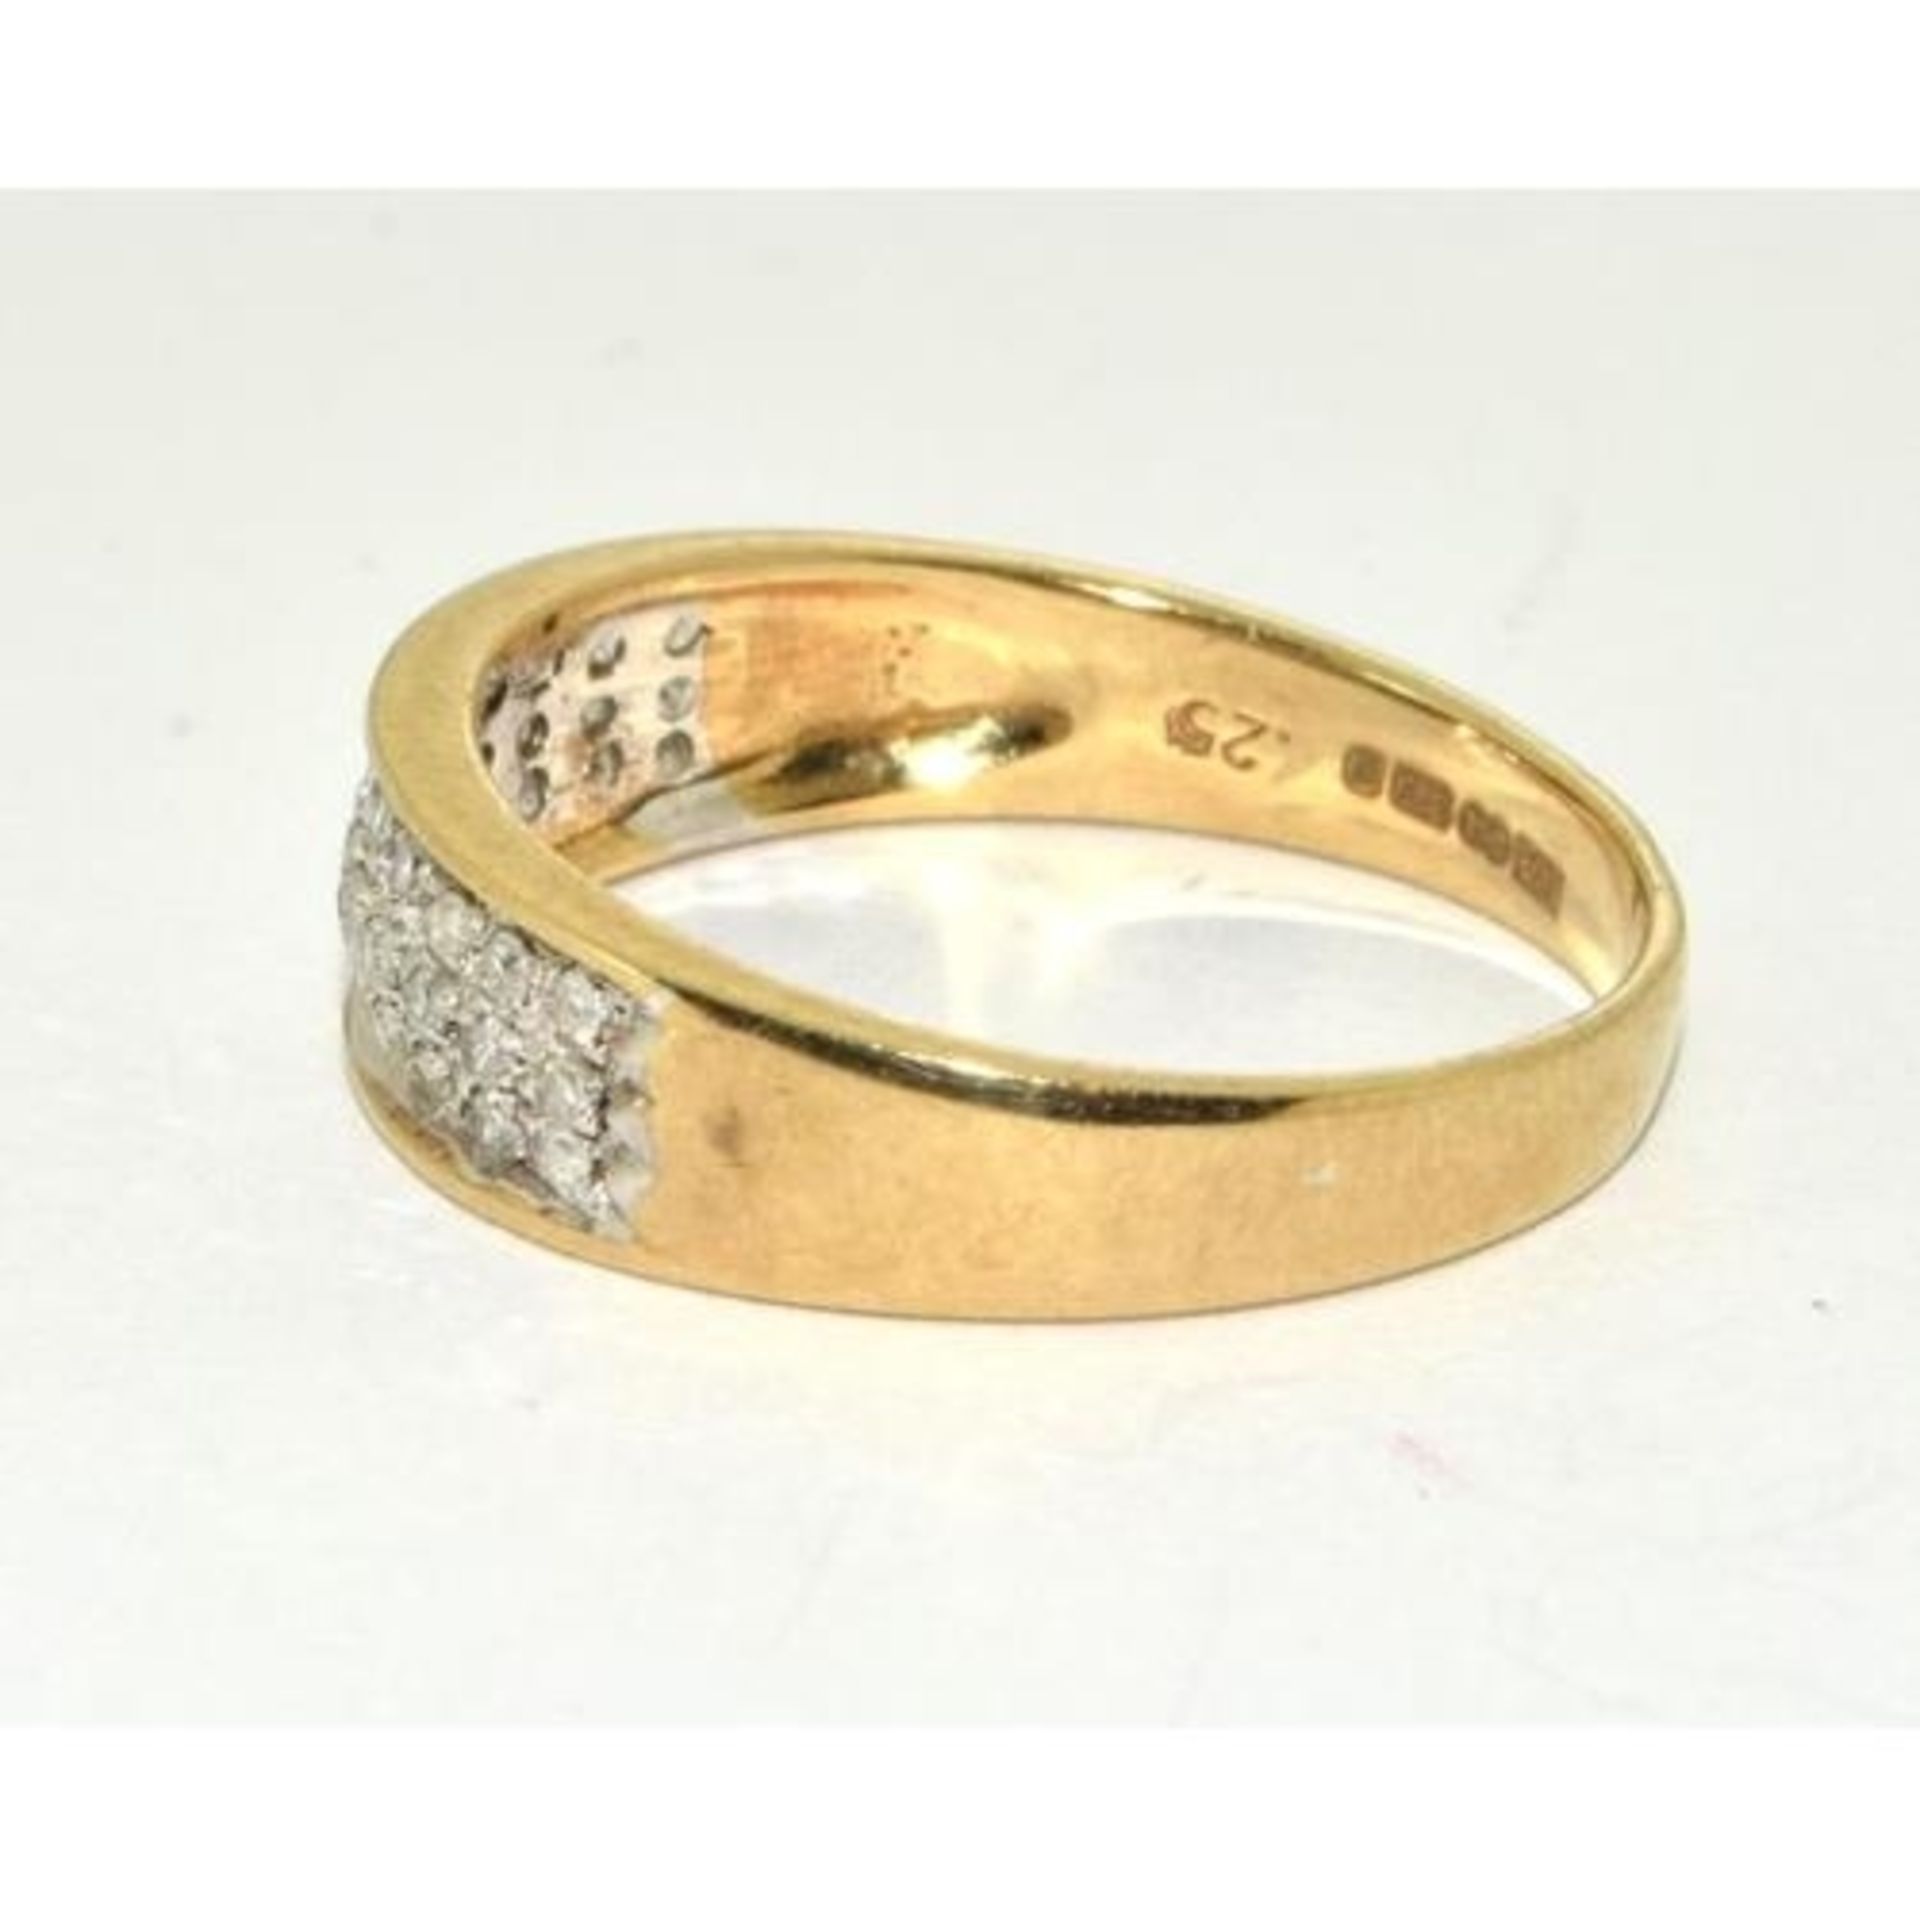 9ct gold ladies diamond ring hallmarked in the ring as 0.25 ct size T - Image 2 of 5